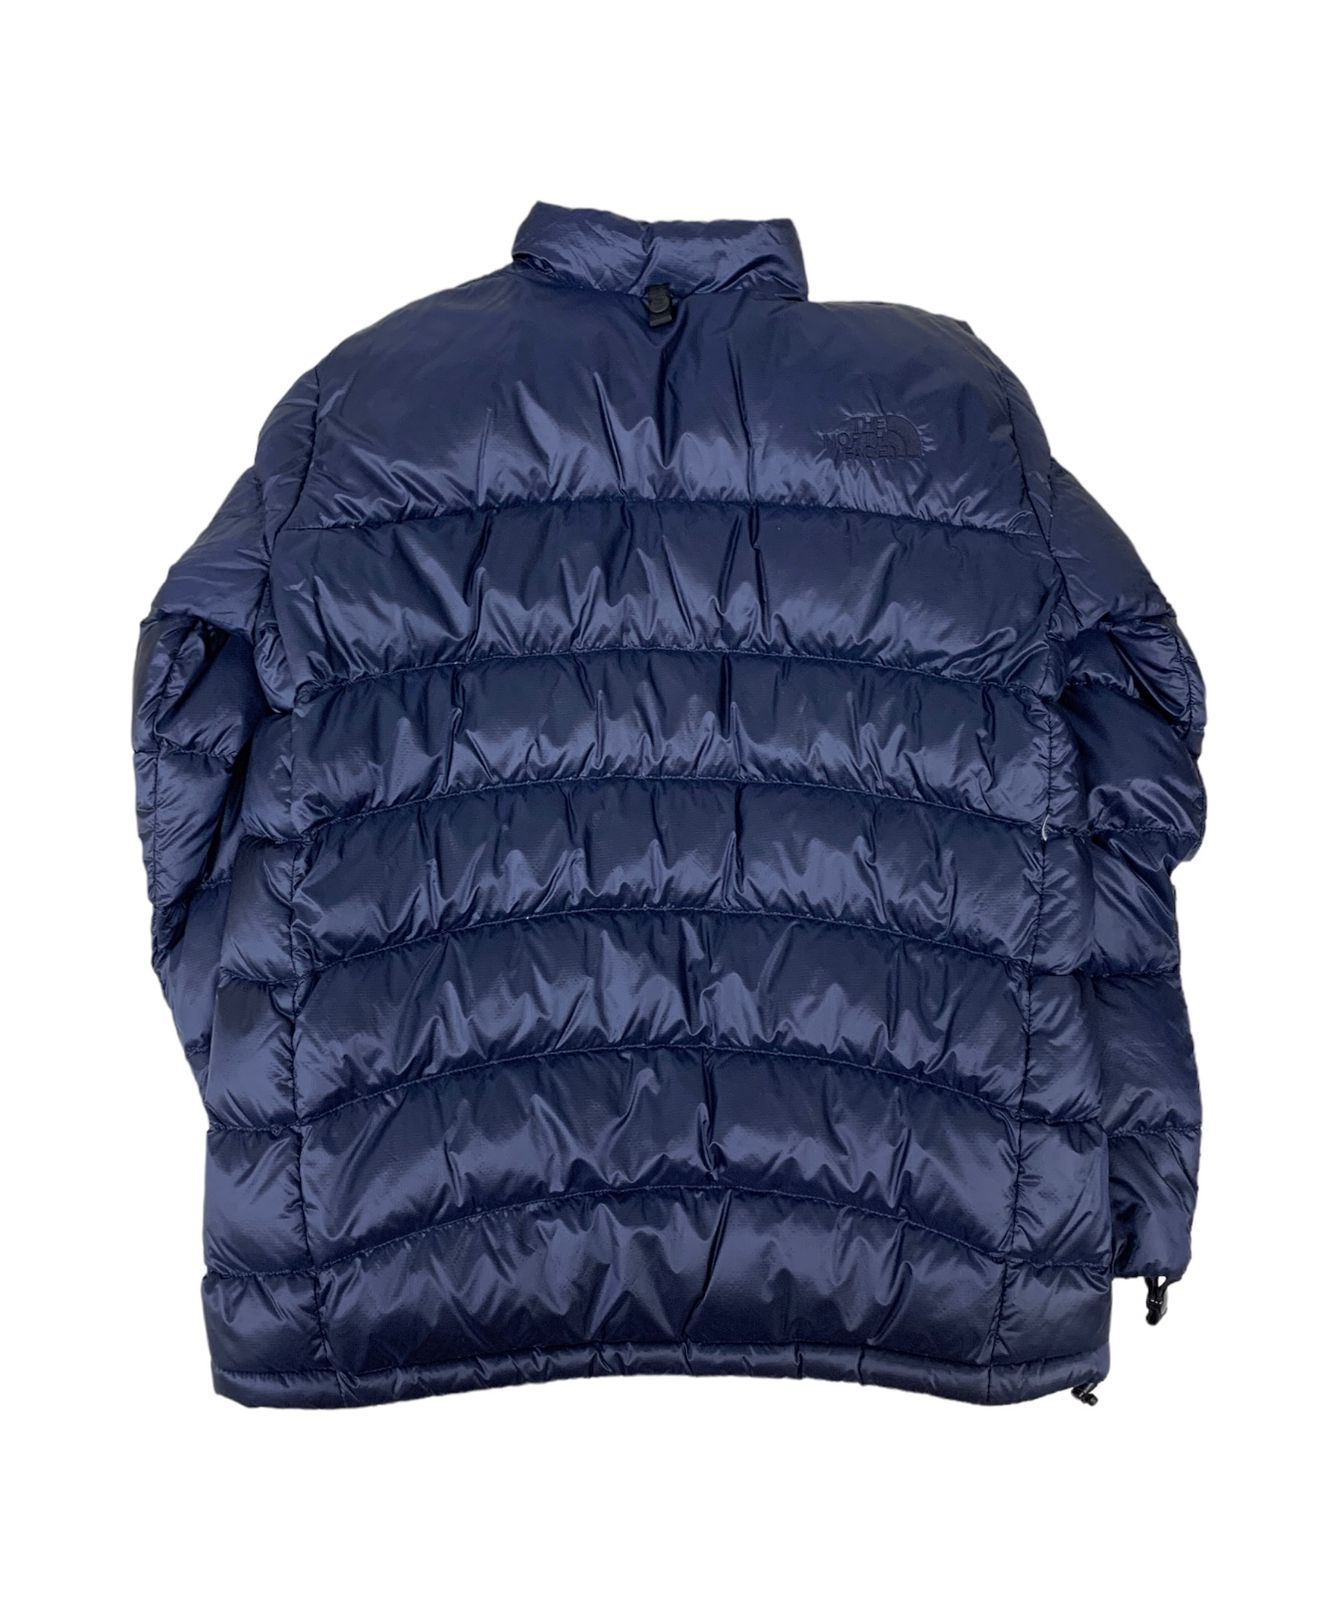 THE NORTH FACE (ザノースフェイス) Novelty Zeus Triclimate Jacket 